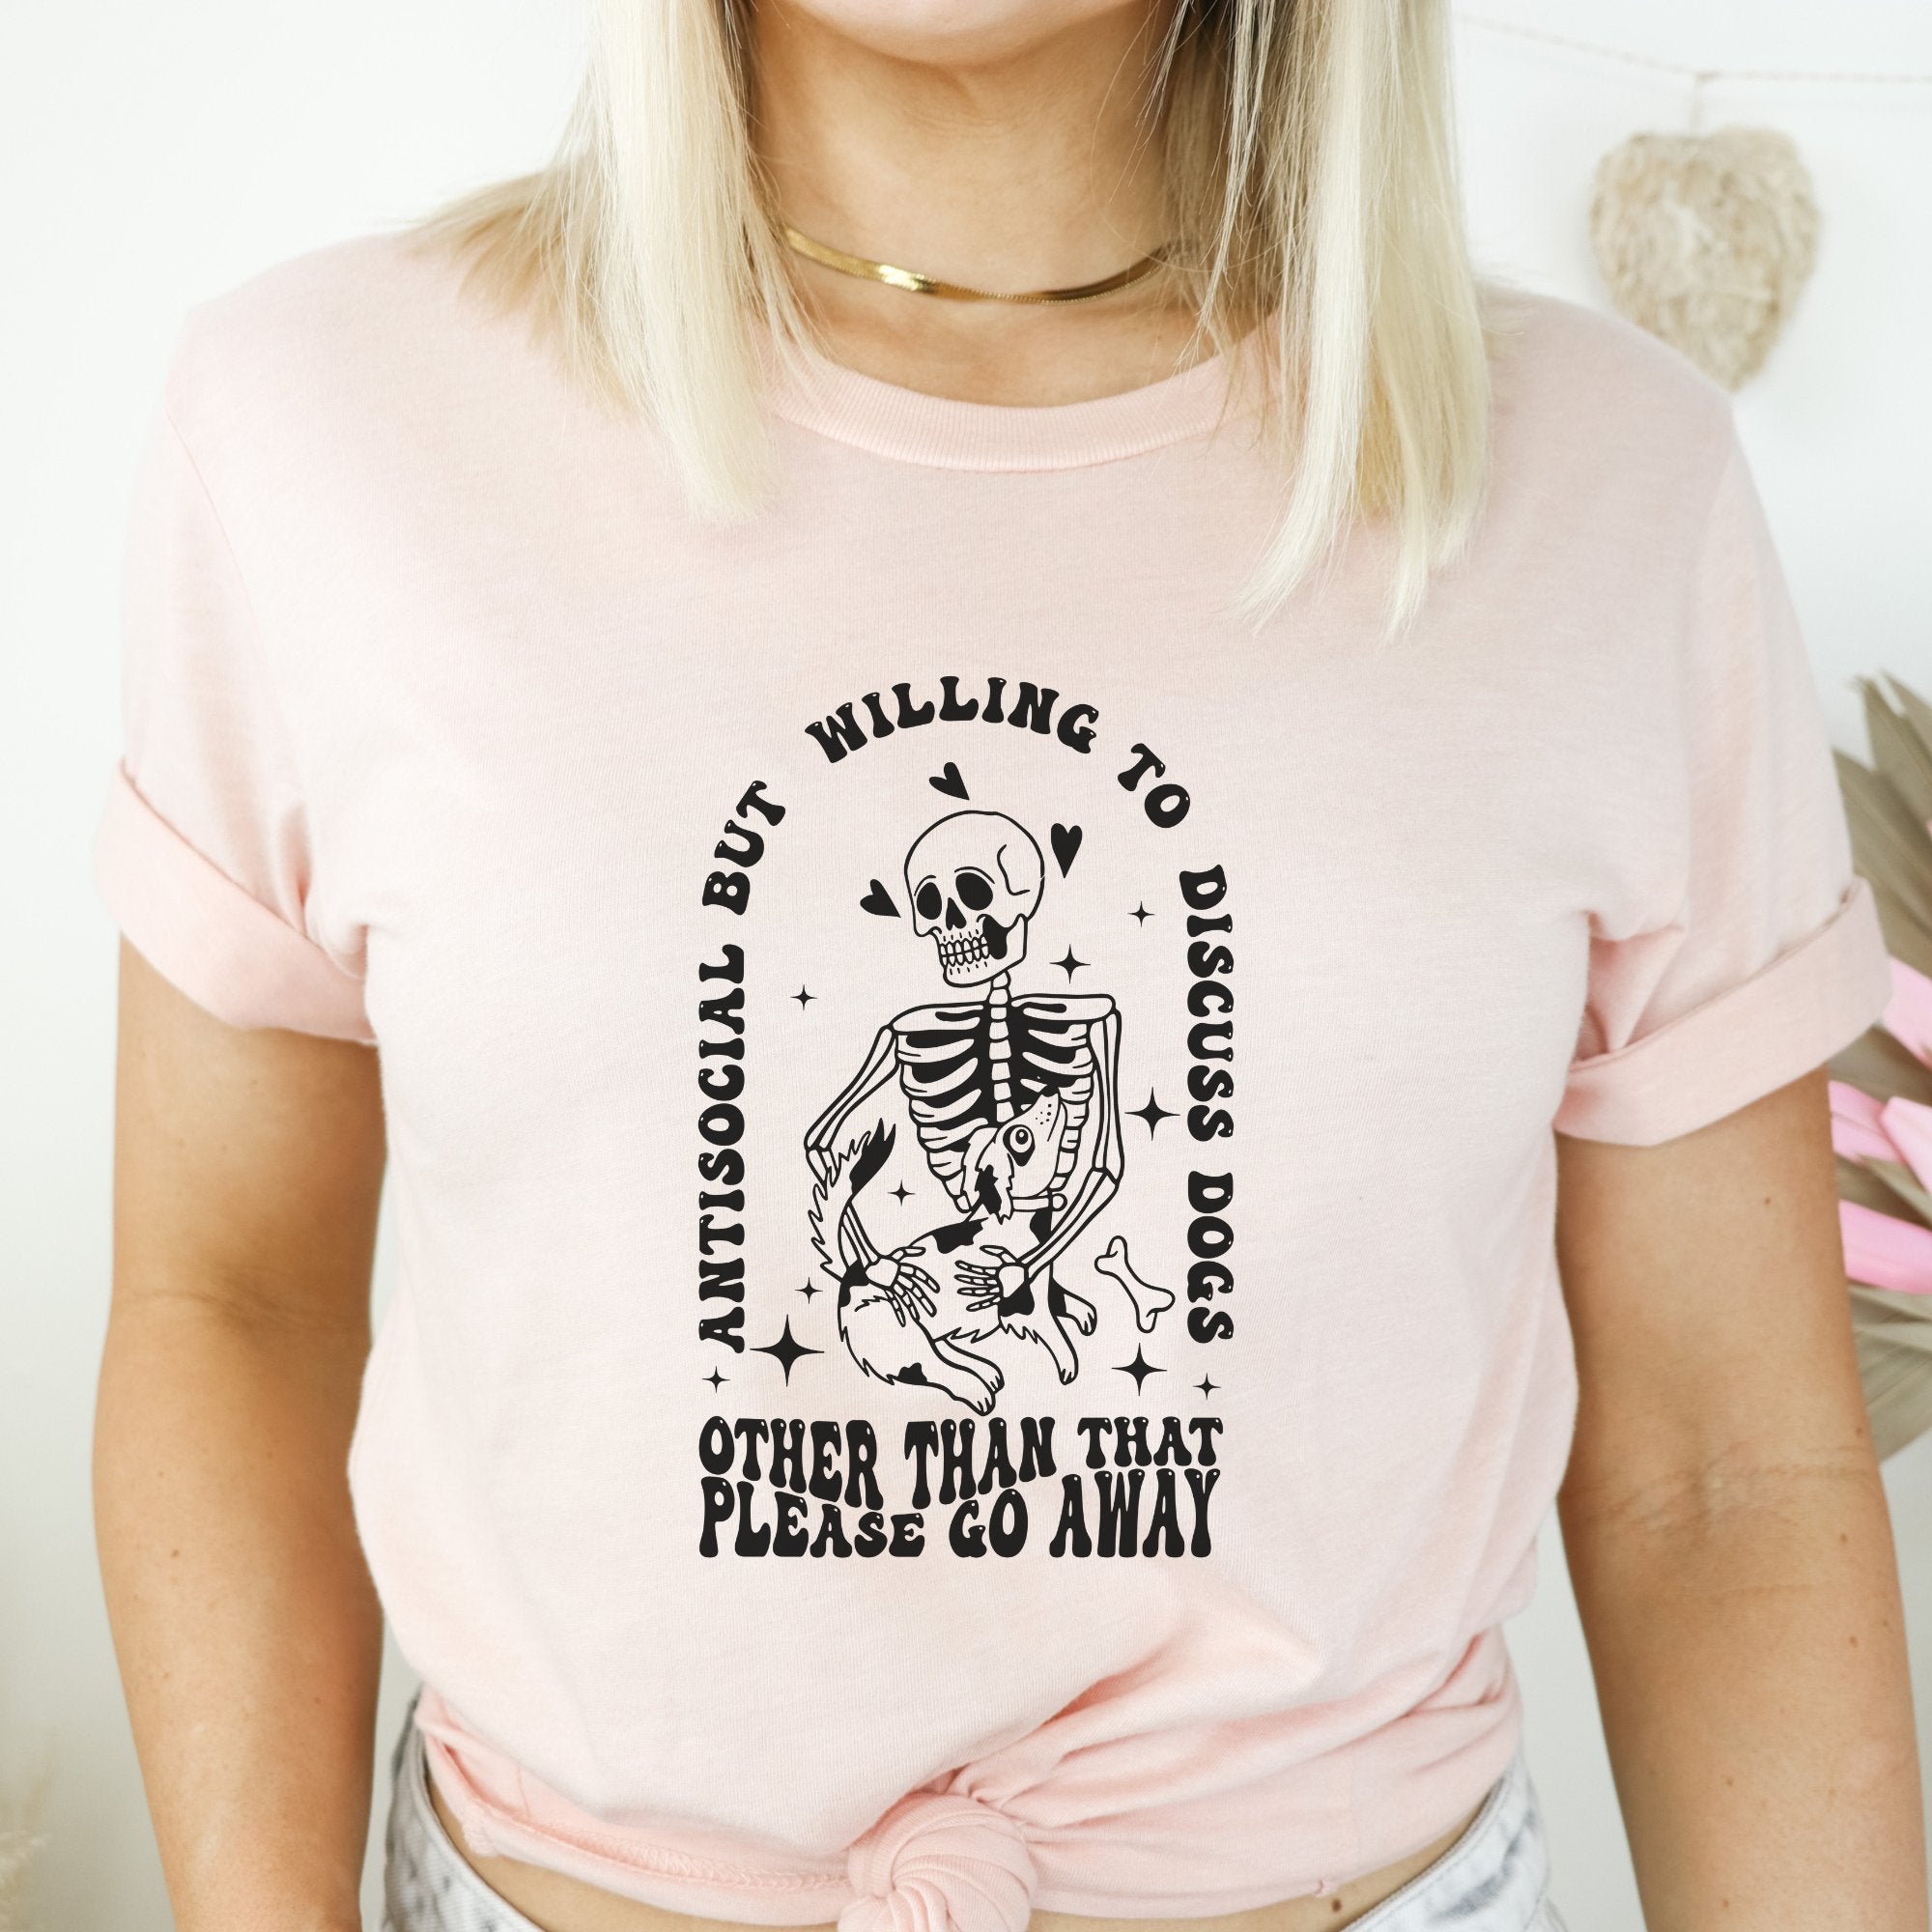 Antisocial But Will Discuss Dogs T-Shirt - Trendznmore